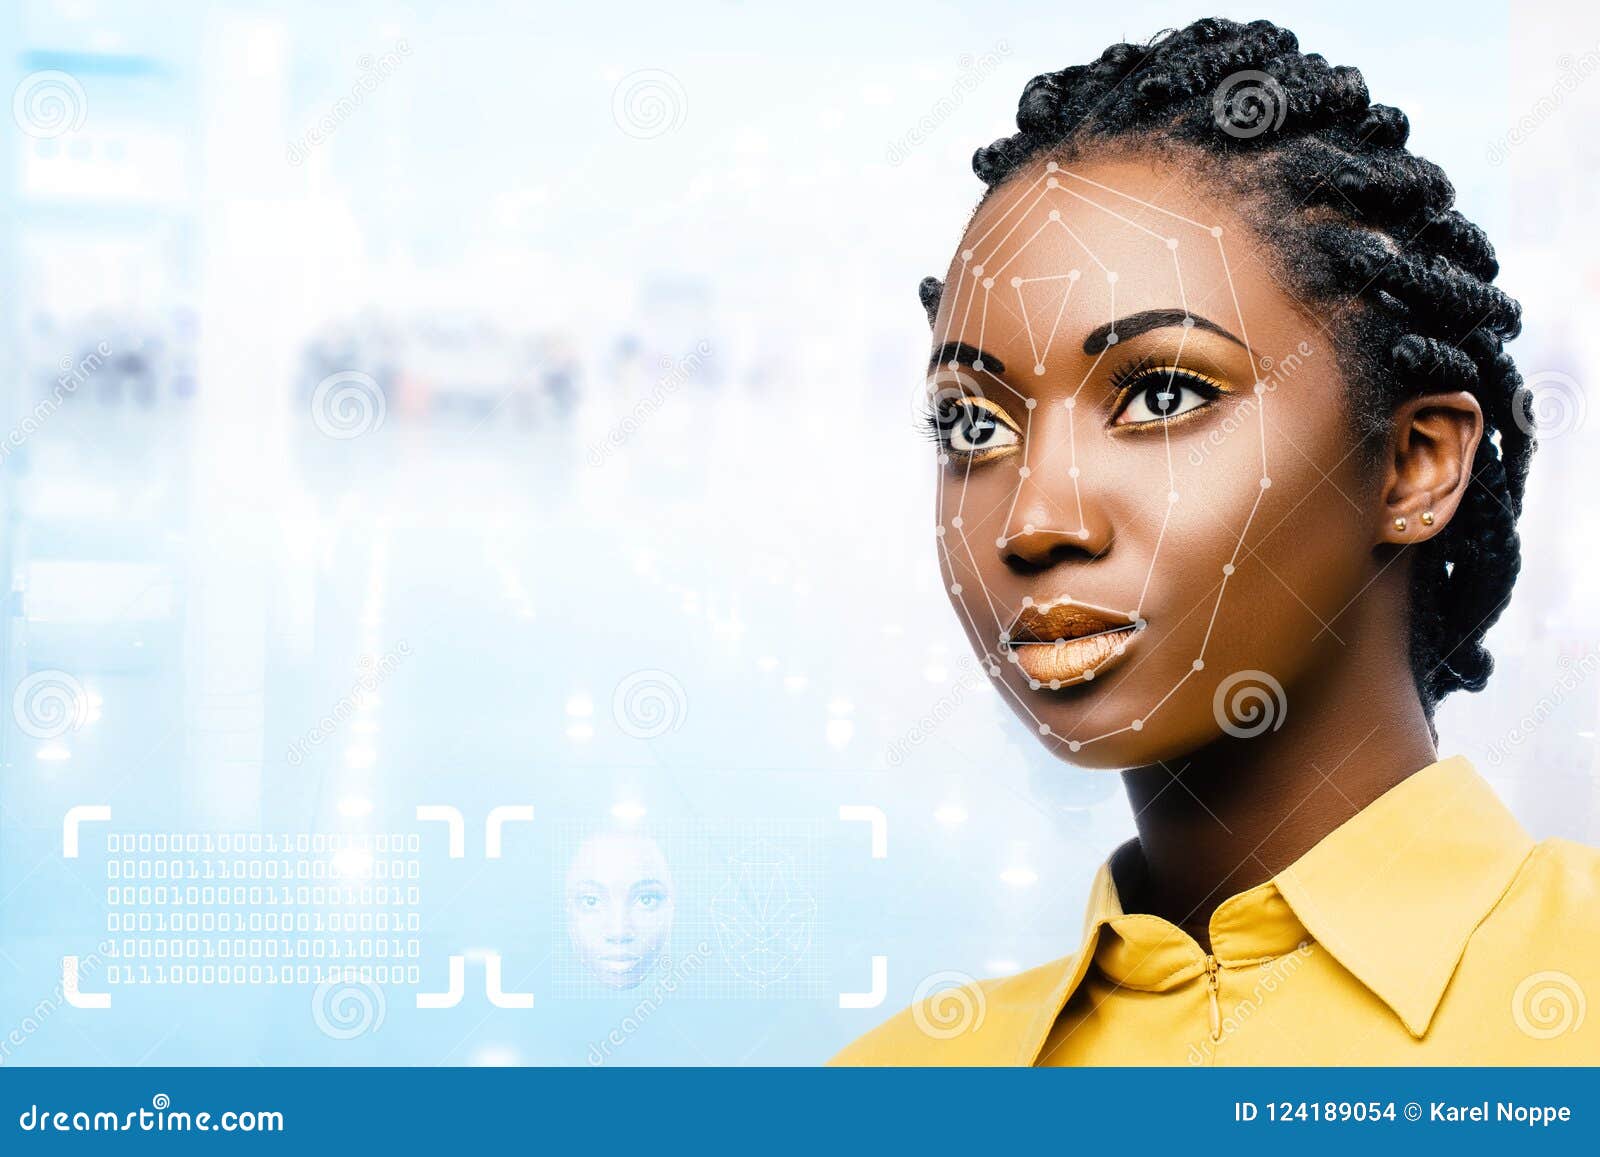 female african face with conceptual face recognition scan.